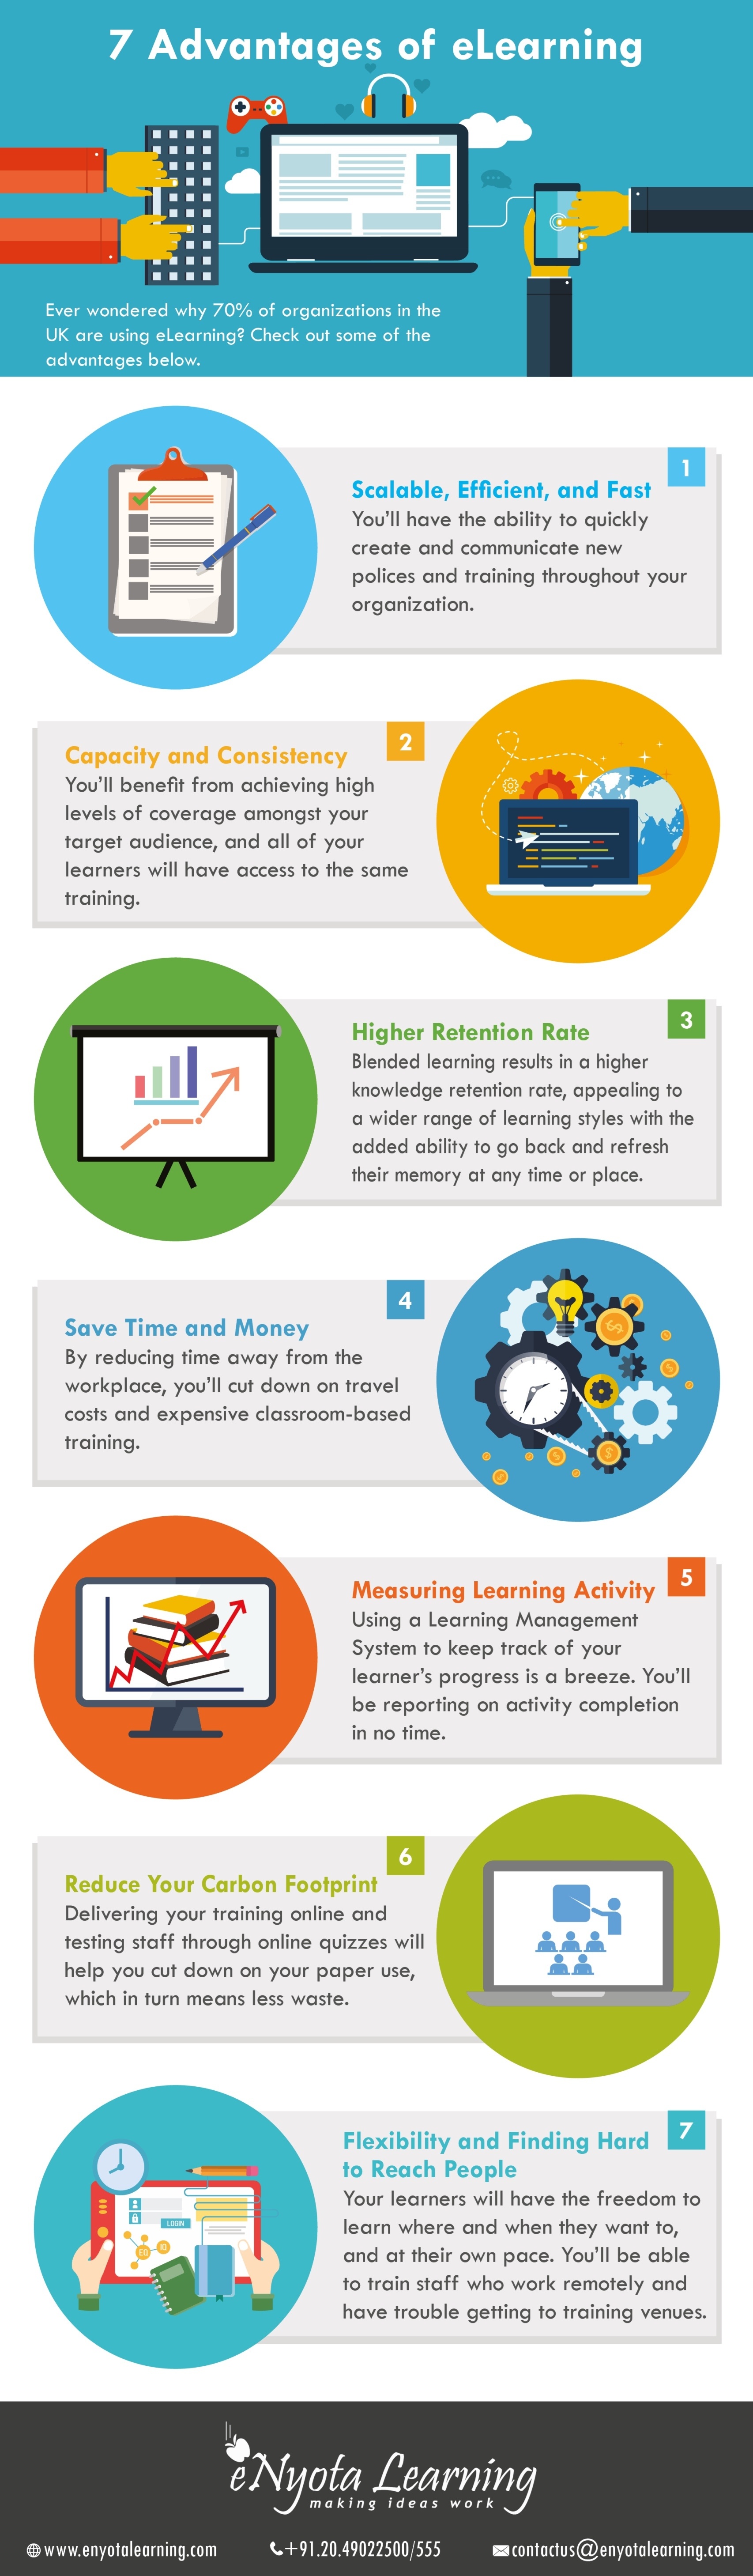 7 Advantages of eLearning Infographic